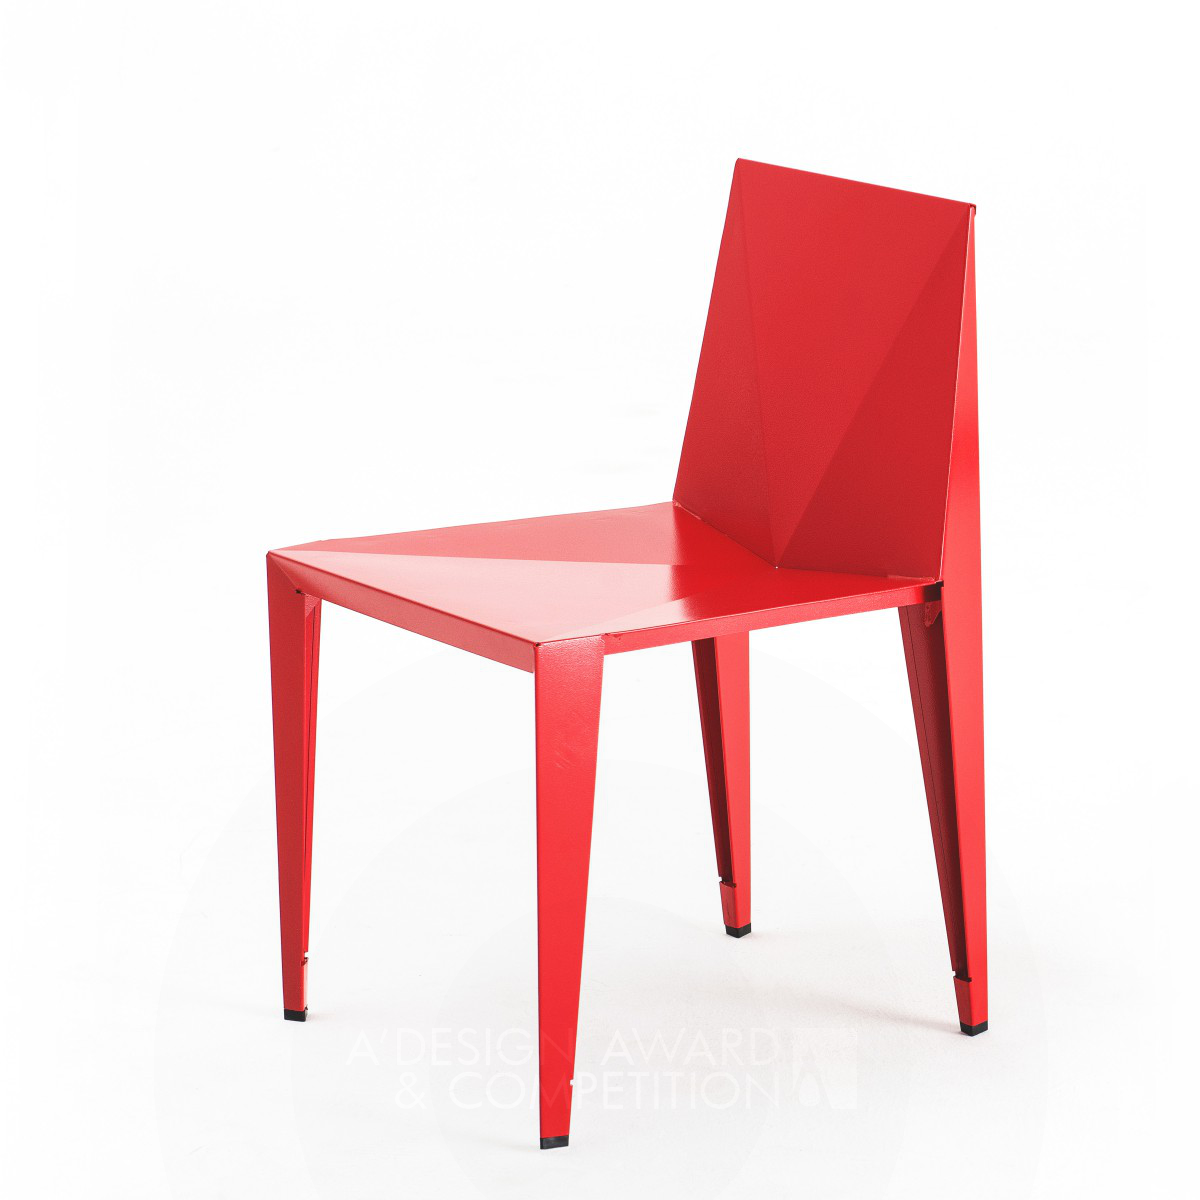 Bend Chair by Vincenzo Vinci